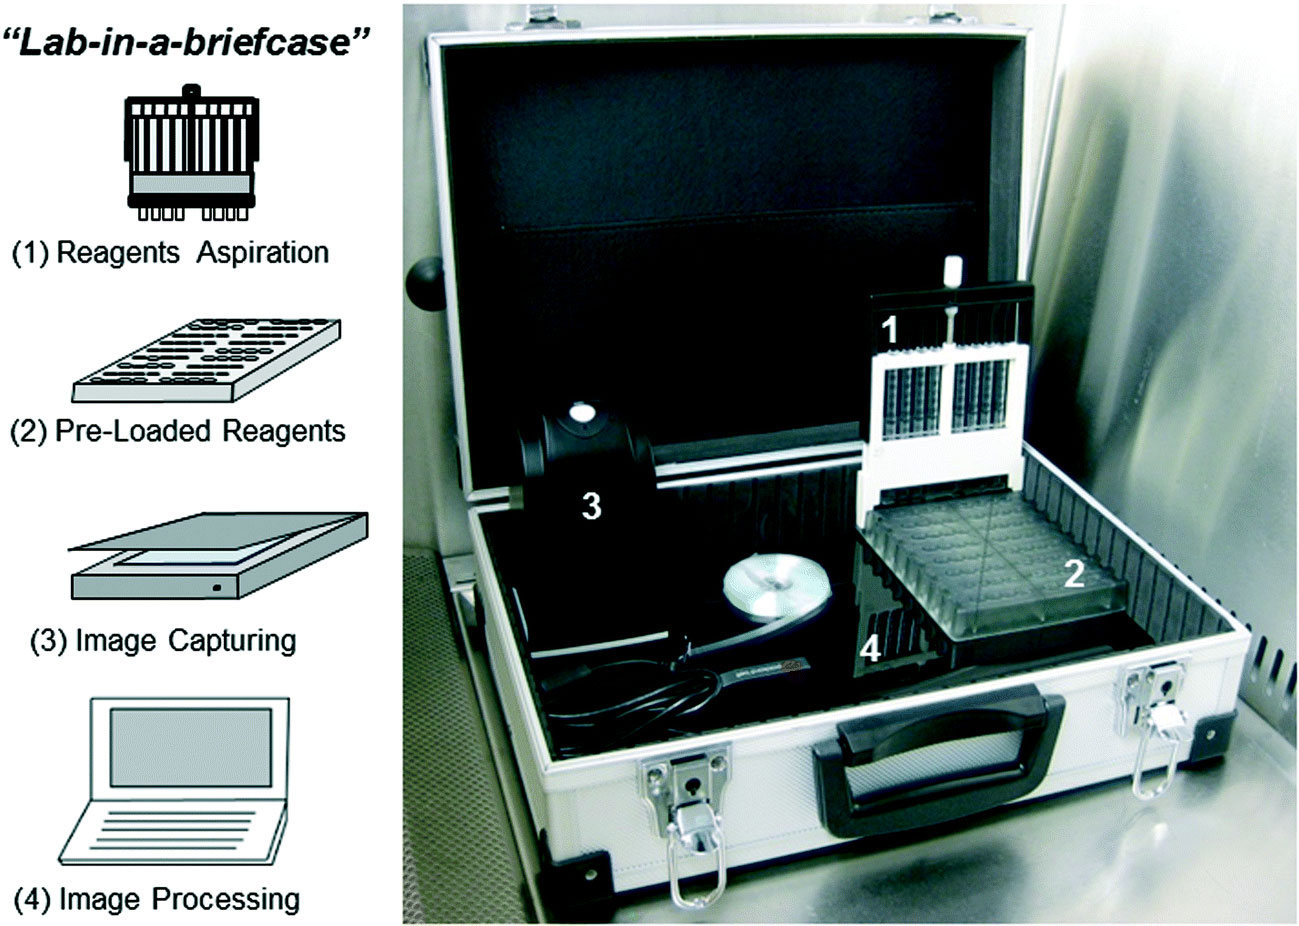 Image: The 4 main components of the newly developed “lab-in-a-briefcase.” (1) Disposable multiple syringe aspirator (MSA) devices, each of which can perform 10 replicate ELISA tests on each of the 8 samples. (2) Customized microwell plates preloaded with reagents that interface with the MSA. (3) Portable USB-powered film scanner for colorimetric signal quantification. (4) Portable computer for real-time data analysis (Photo courtesy of Barbosa AI et al., 2015, and the journal Lab on a Chip.)